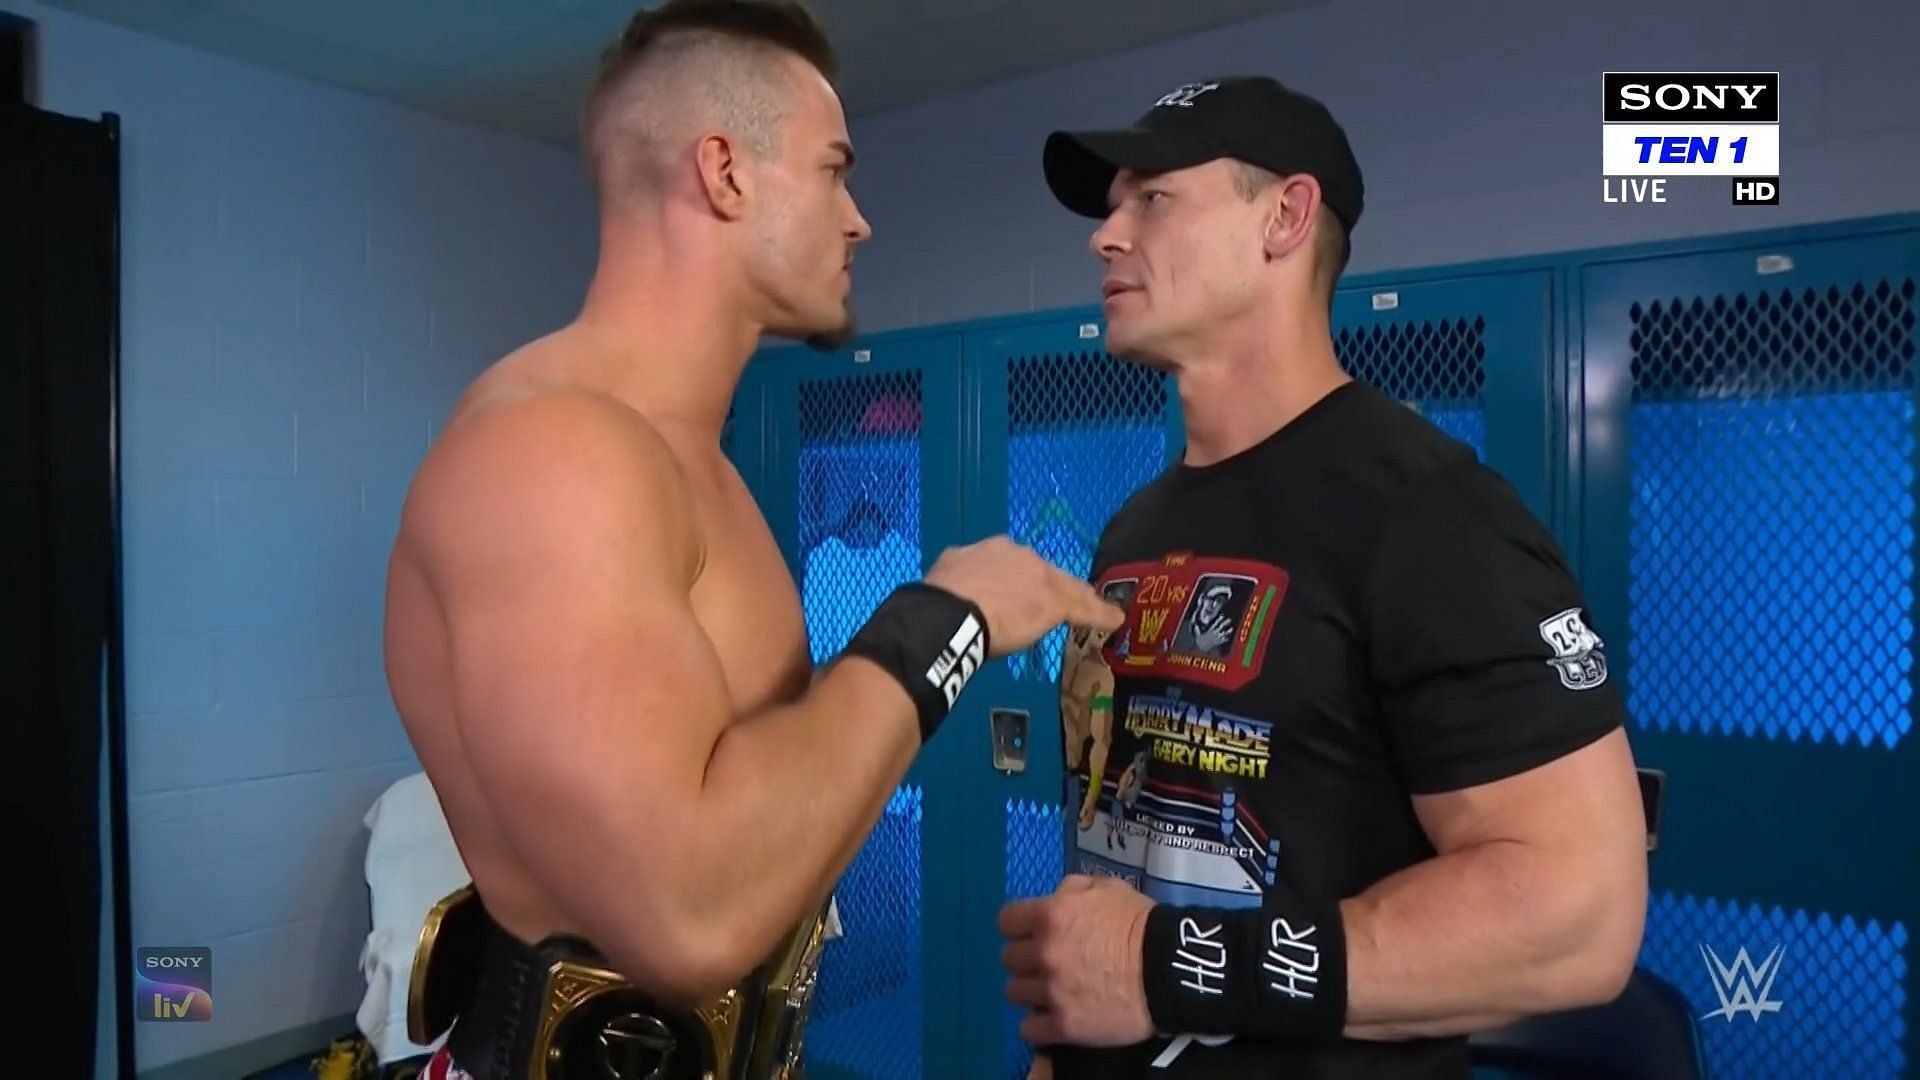 Could Theory and Cena be headed for a WrestleMania showdown?